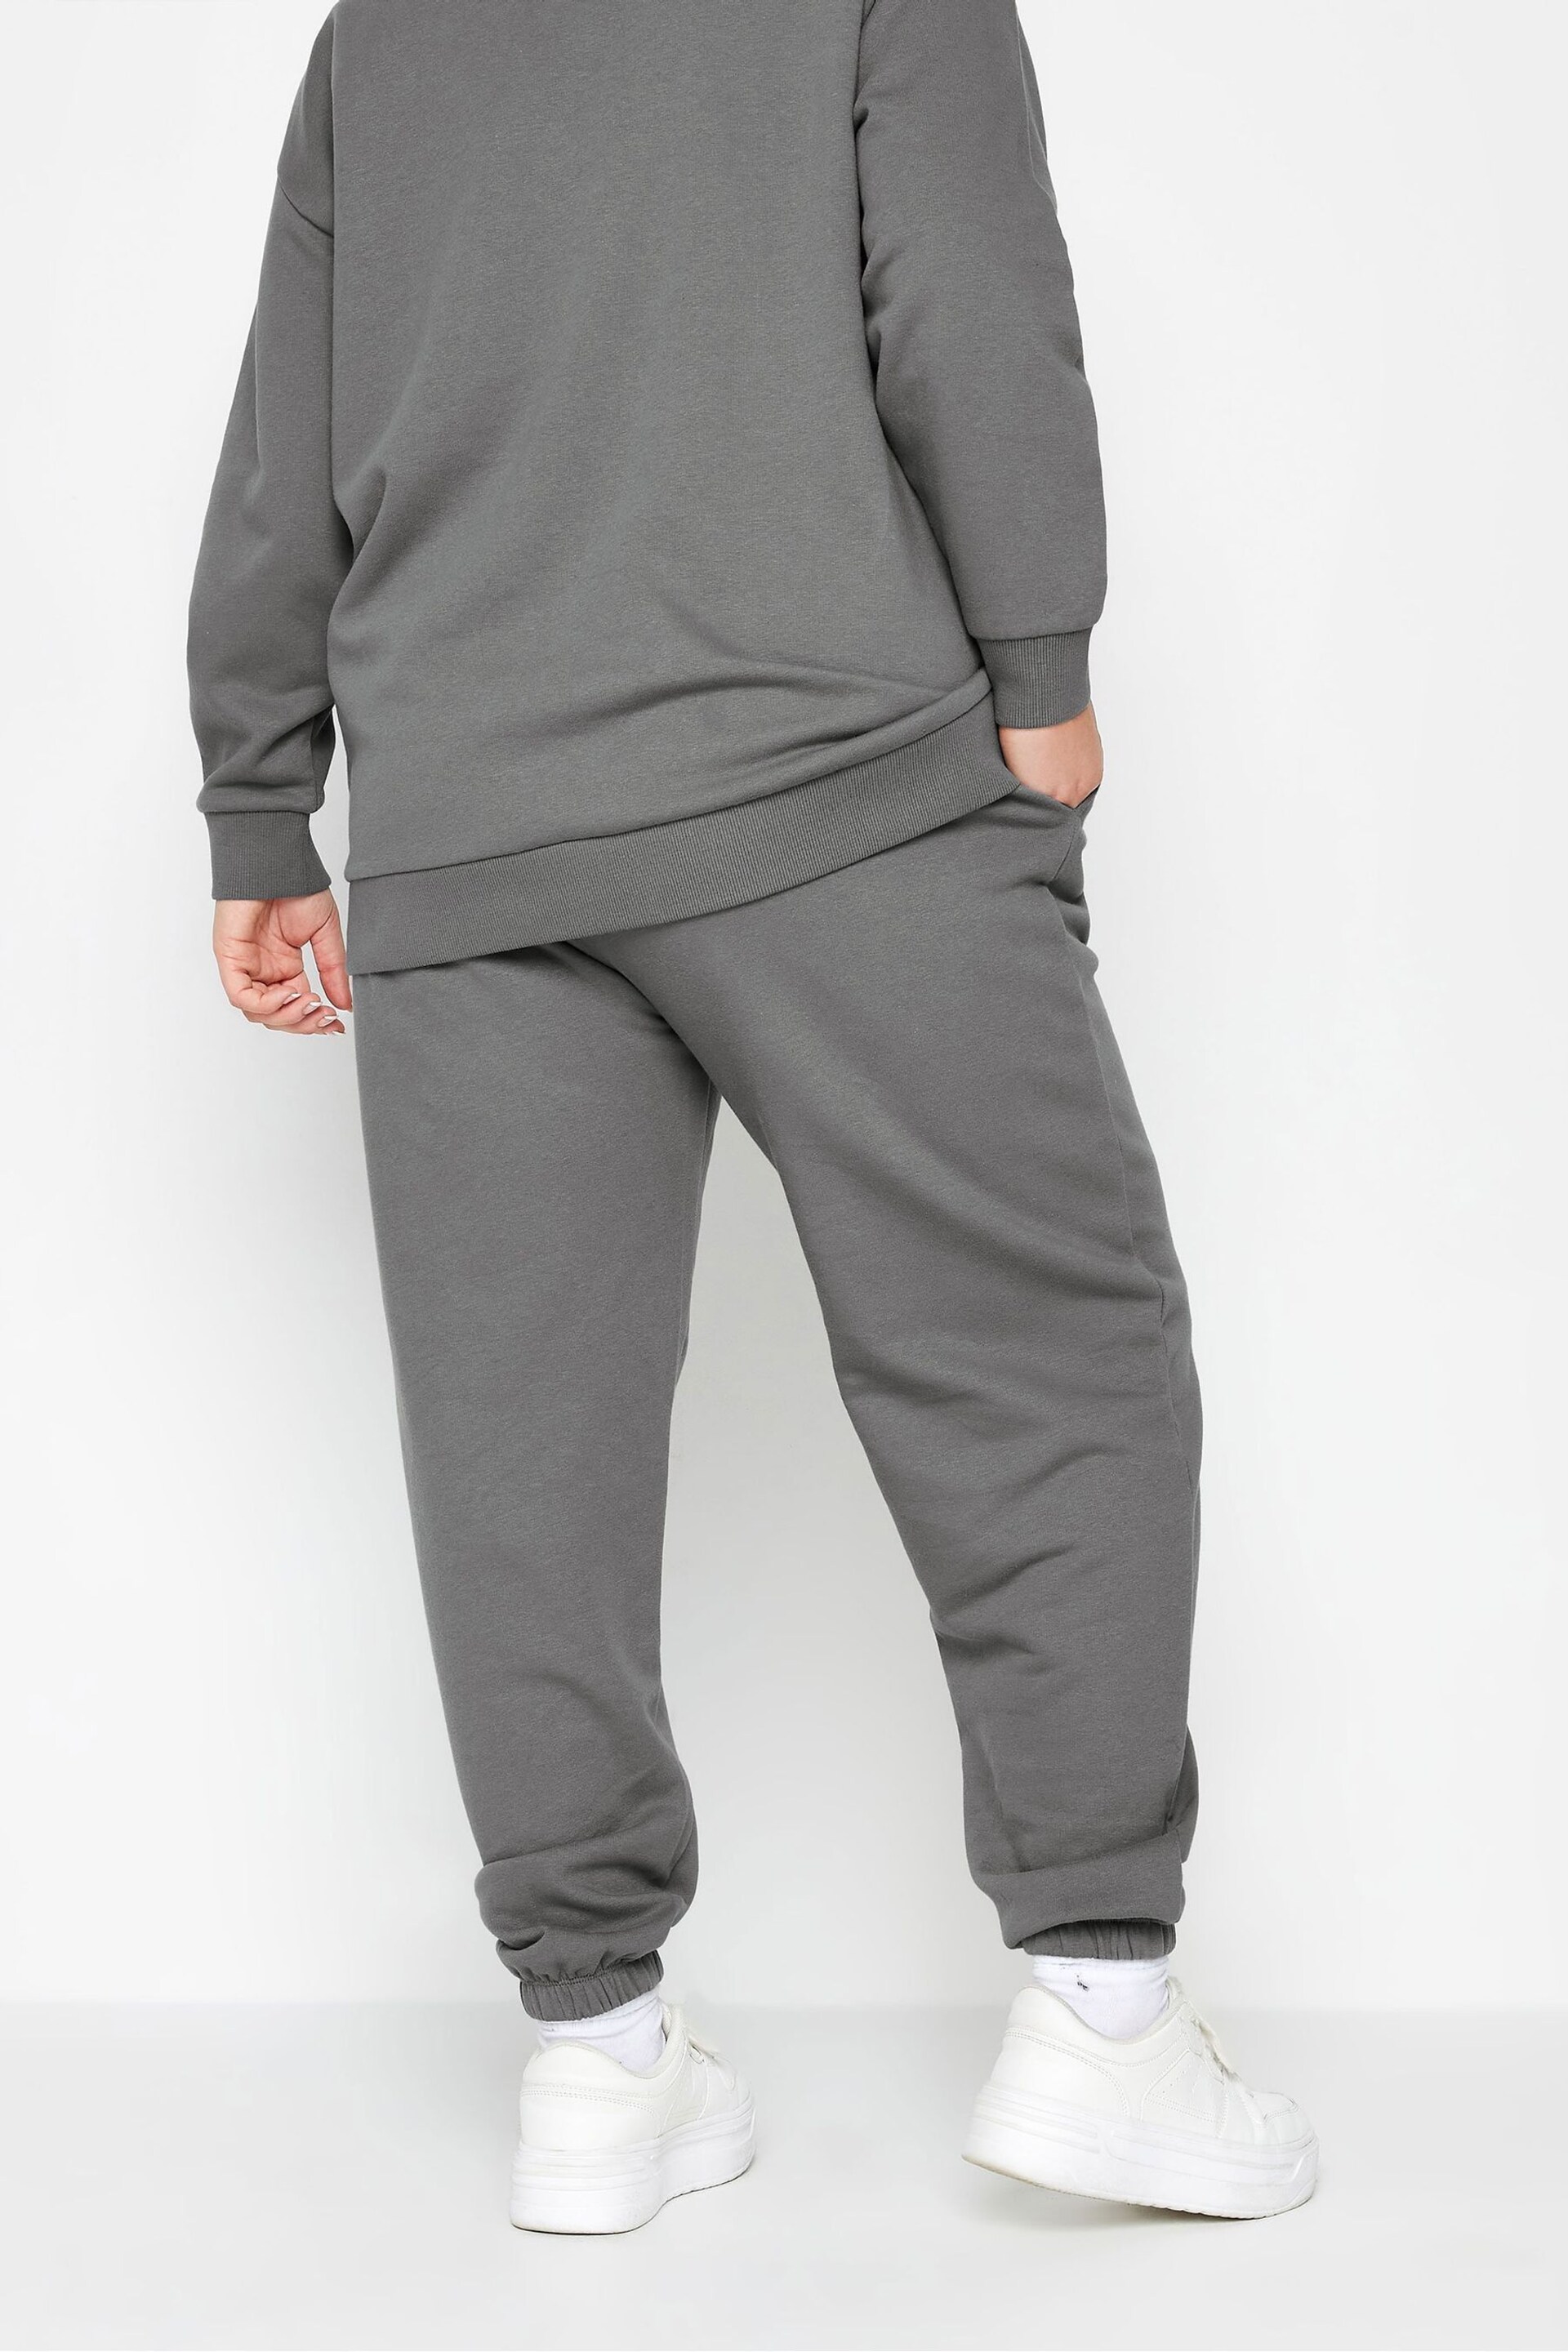 Yours Curve Grey Joggers - Image 2 of 4